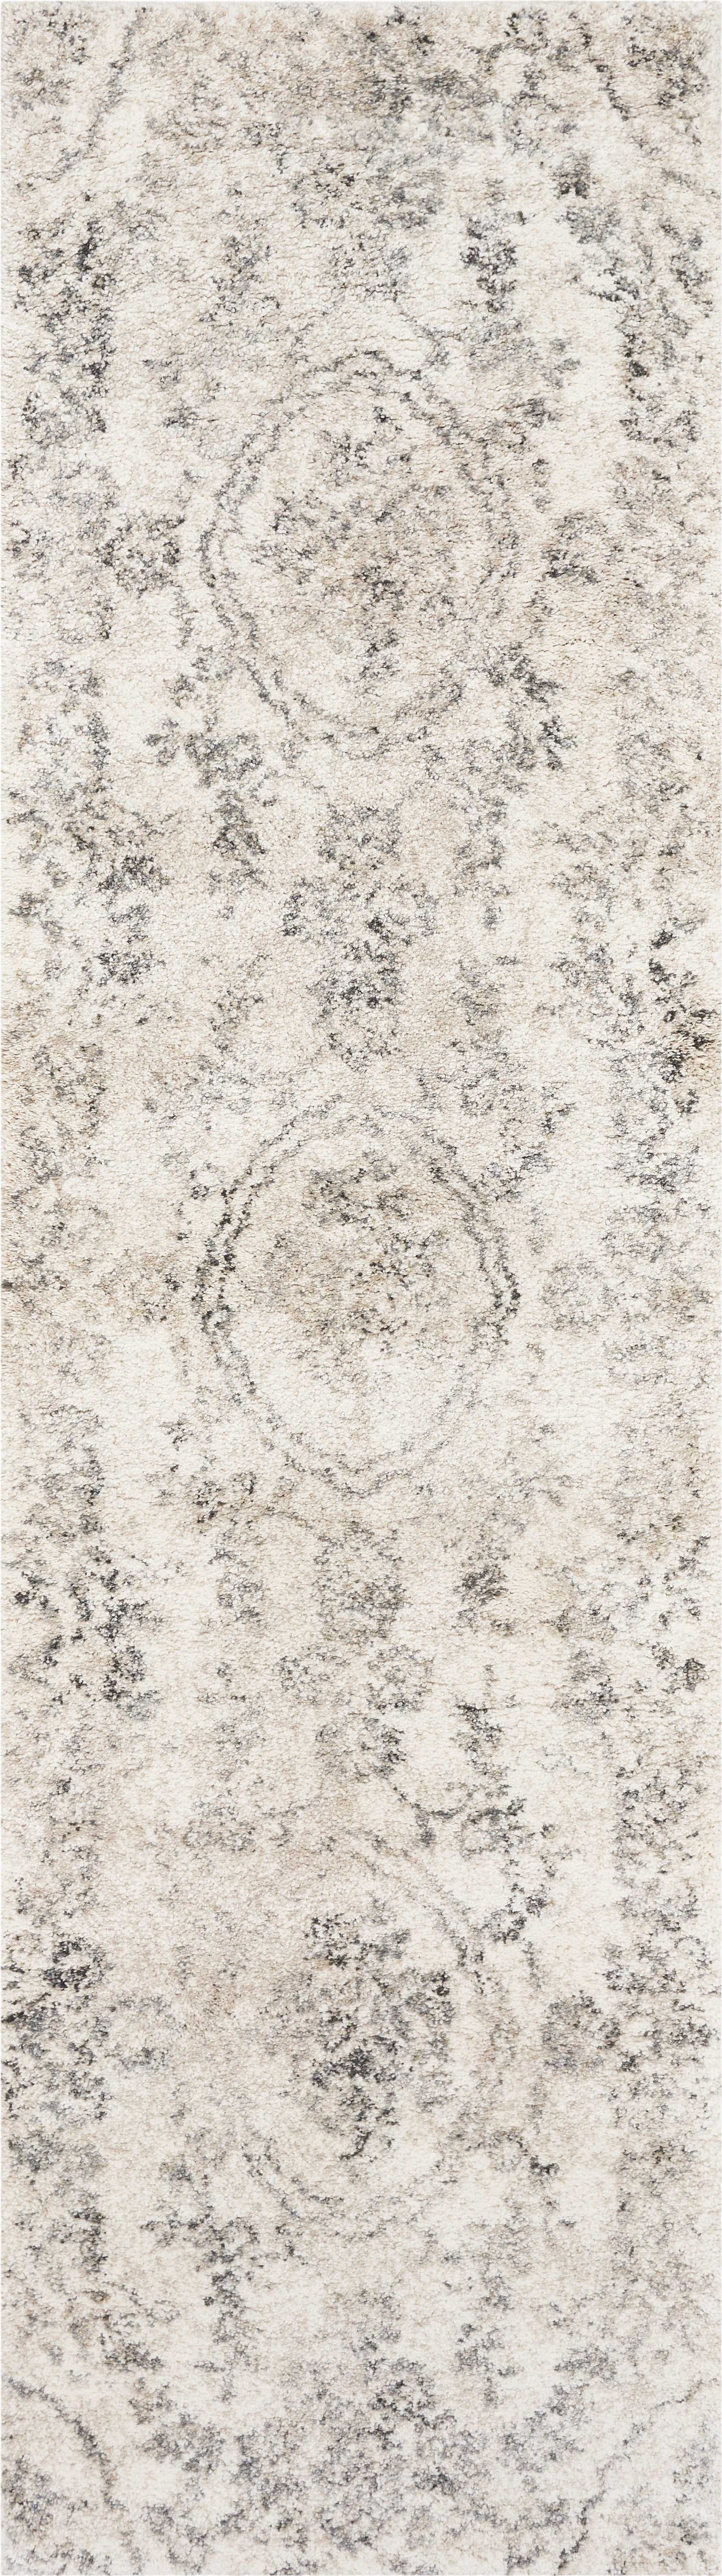 5'X8' Grey Machine Woven Distressed Floral Medallion Indoor Area Rug